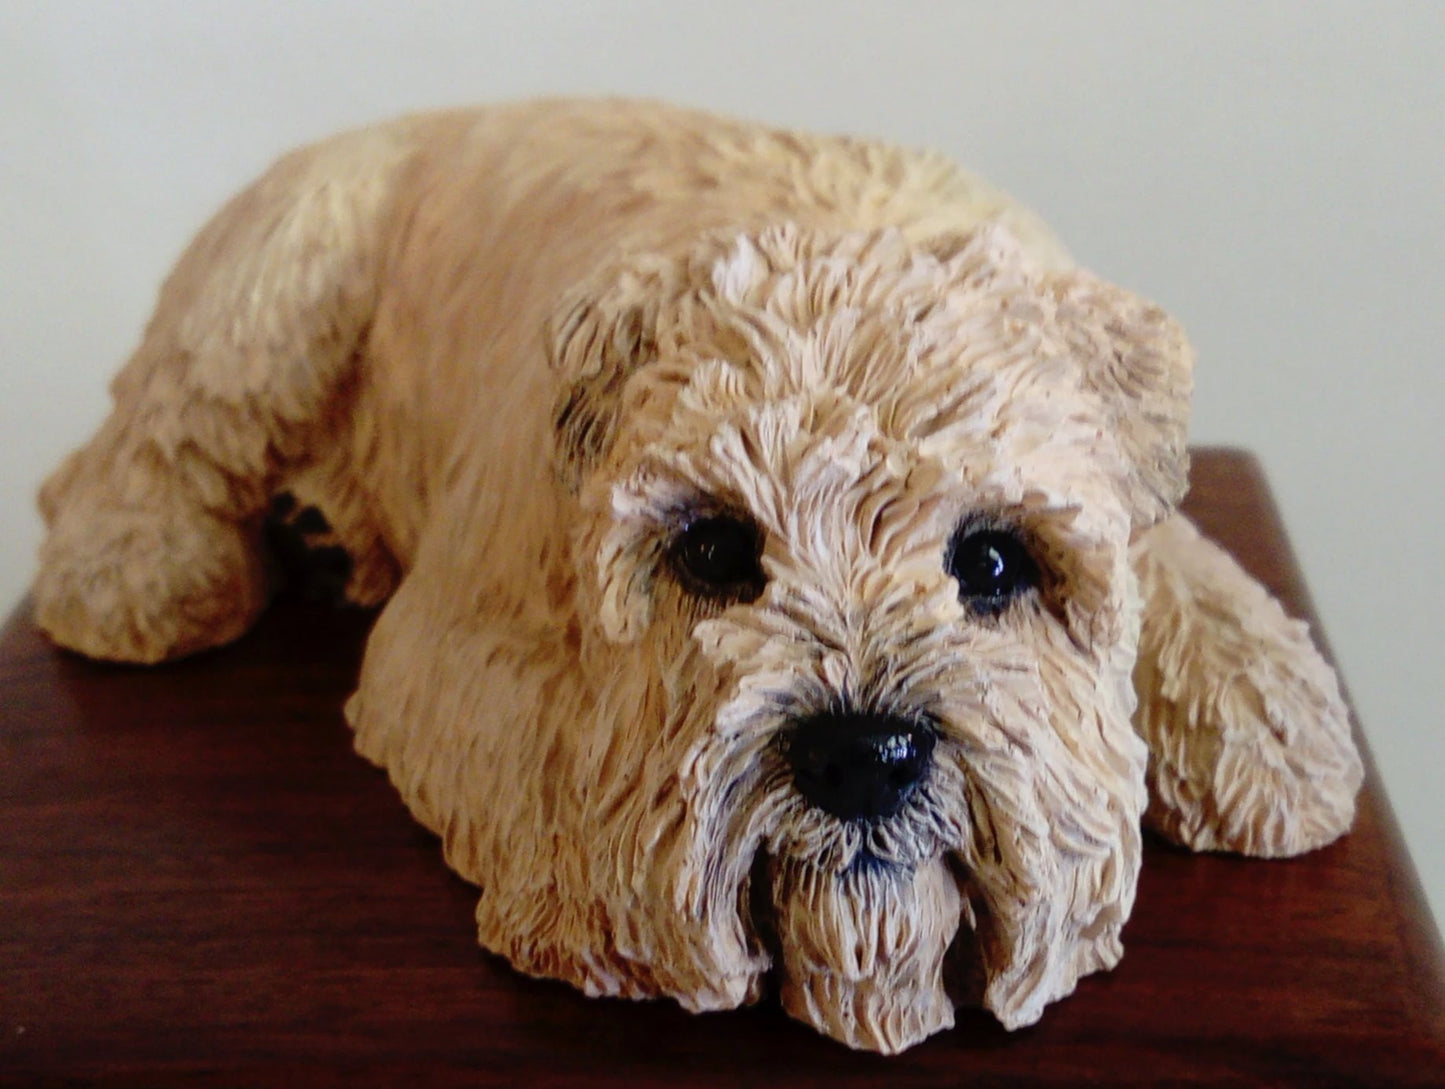 Soft Coated Wheaten Terrier Cremation Urn For Ashes